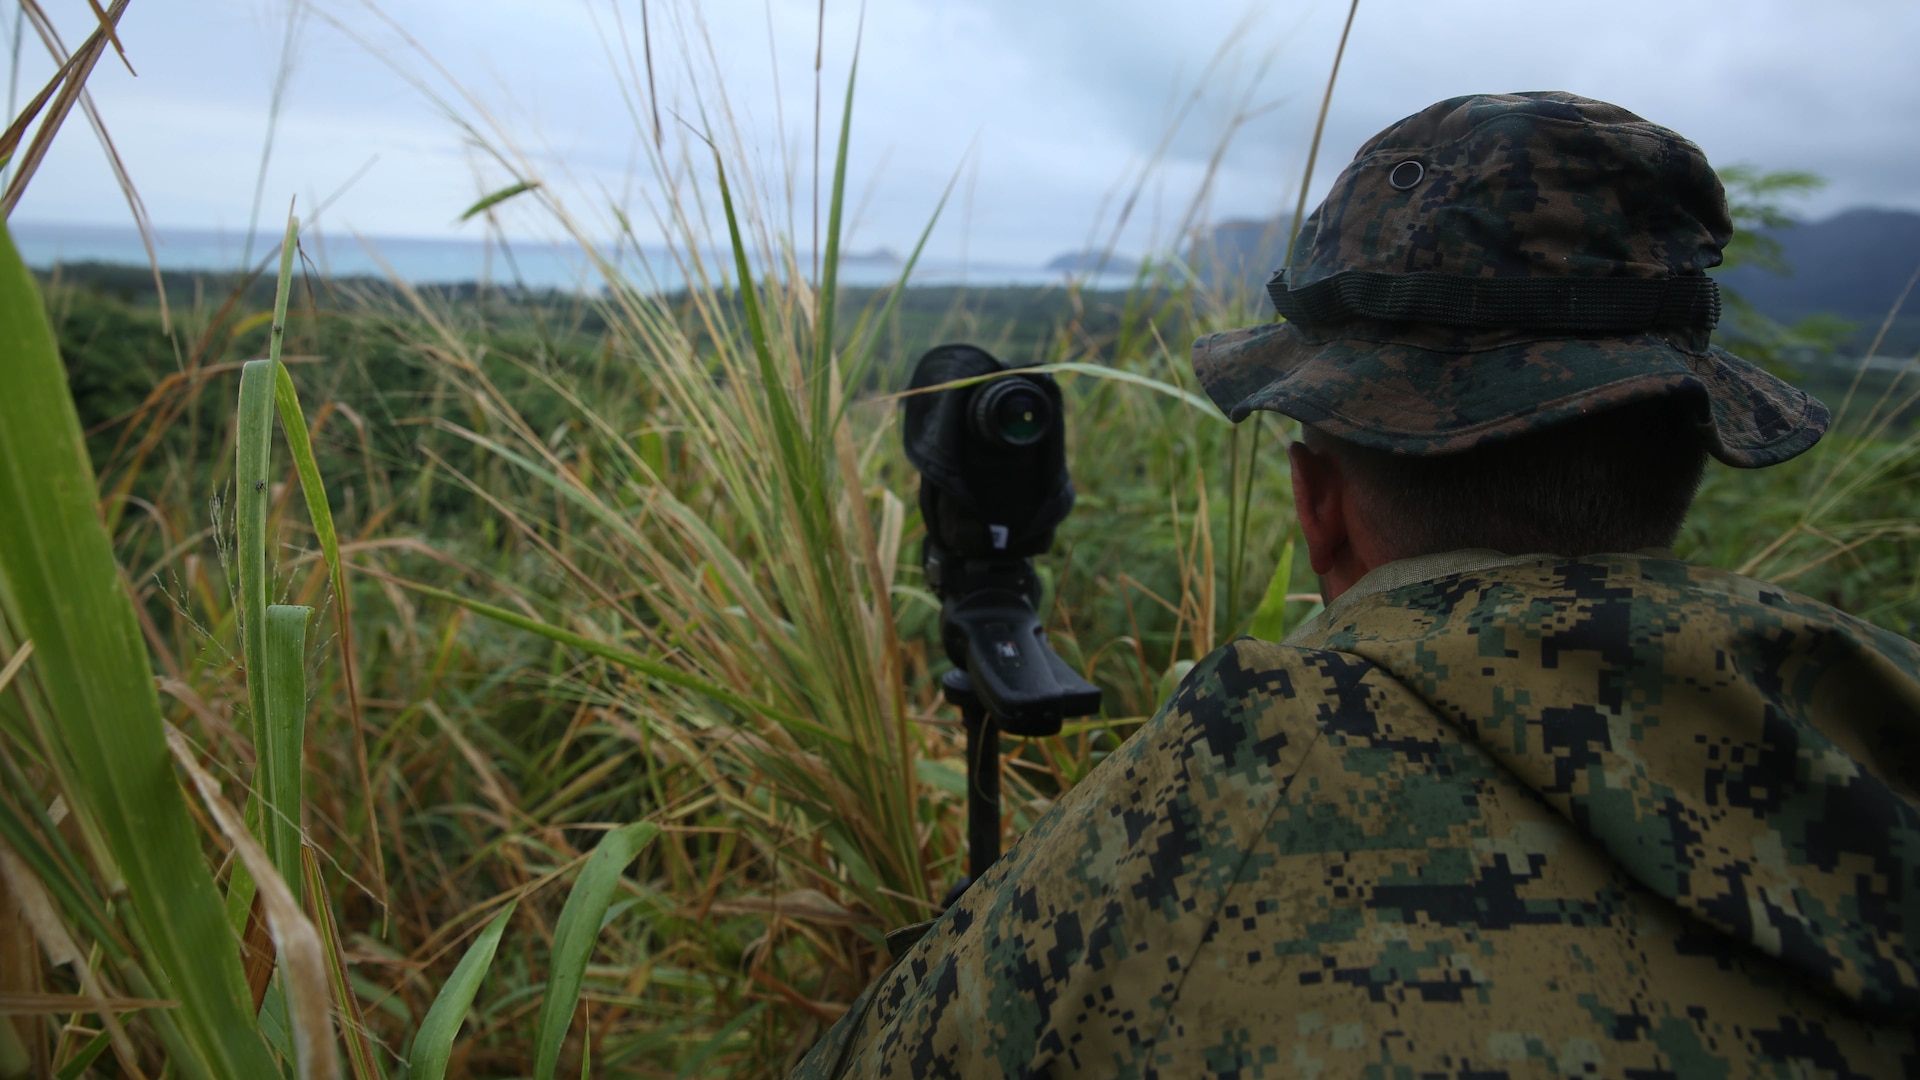 Lance Cpl. Mark Toub Jr., from Boyertown, Pa., and pointman with Company A, 1st Reconnaissance Battalion, 1st Marine Division, surveys a named area of interest during reconnaissance and surveillance training, Nov. 19-21, 2015, aboard Marine Corps Training Area Bellows, Hawaii. The Marines conducted insertion, infiltration, execution, exfiltration, and extraction in terrain unfamiliar to what is usually found at their home base in California. The Hawaiian terrain ranged from beach shores, to dense jungle and open valleys during pouring rains. 